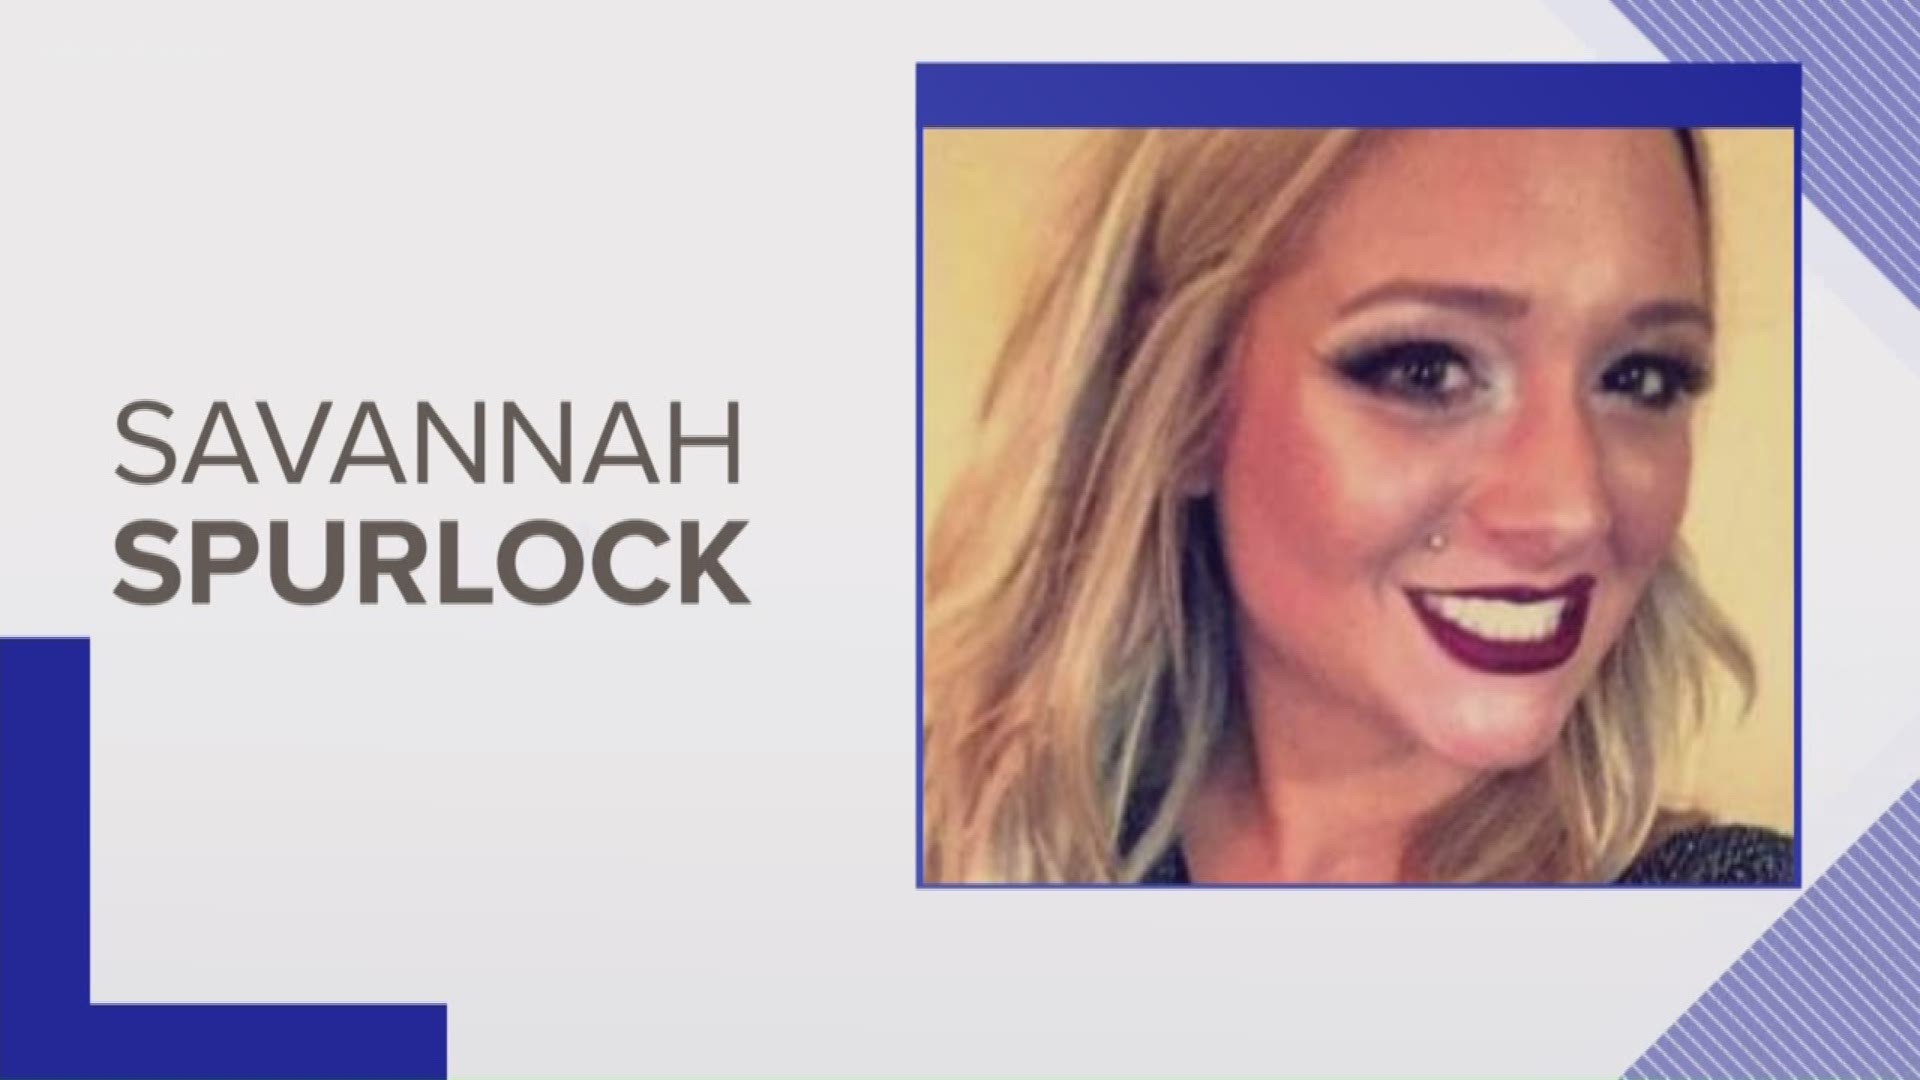 Savannah Spurlock - from Richmond was last seen in early January leaving a Lexington bar with three men. She hasn't been seen since. An increase in reward money is now being offered.